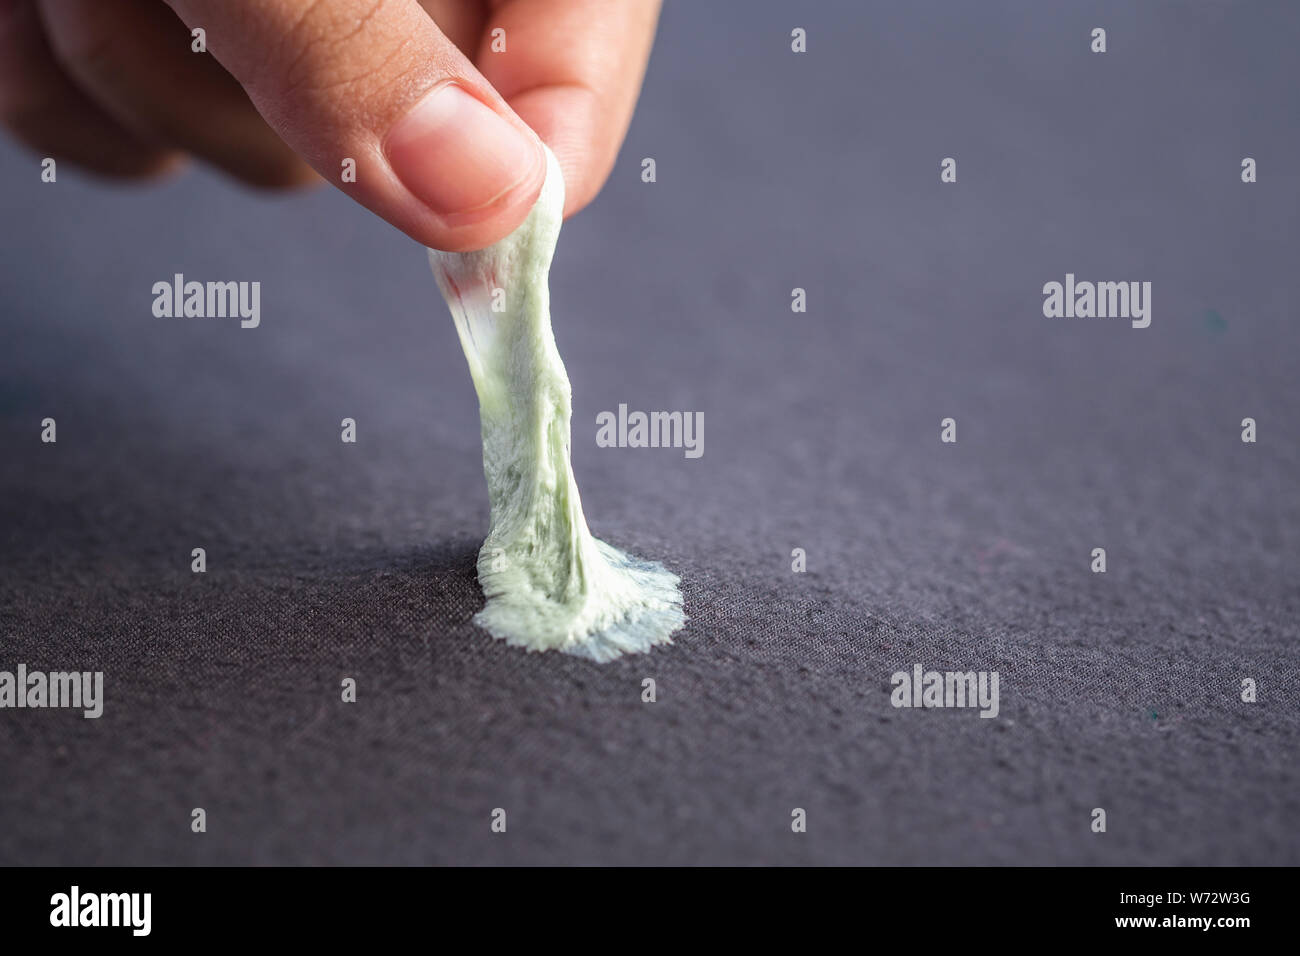 Close up hand removing sticky chewing gum from black textile or clothes Stock Photo